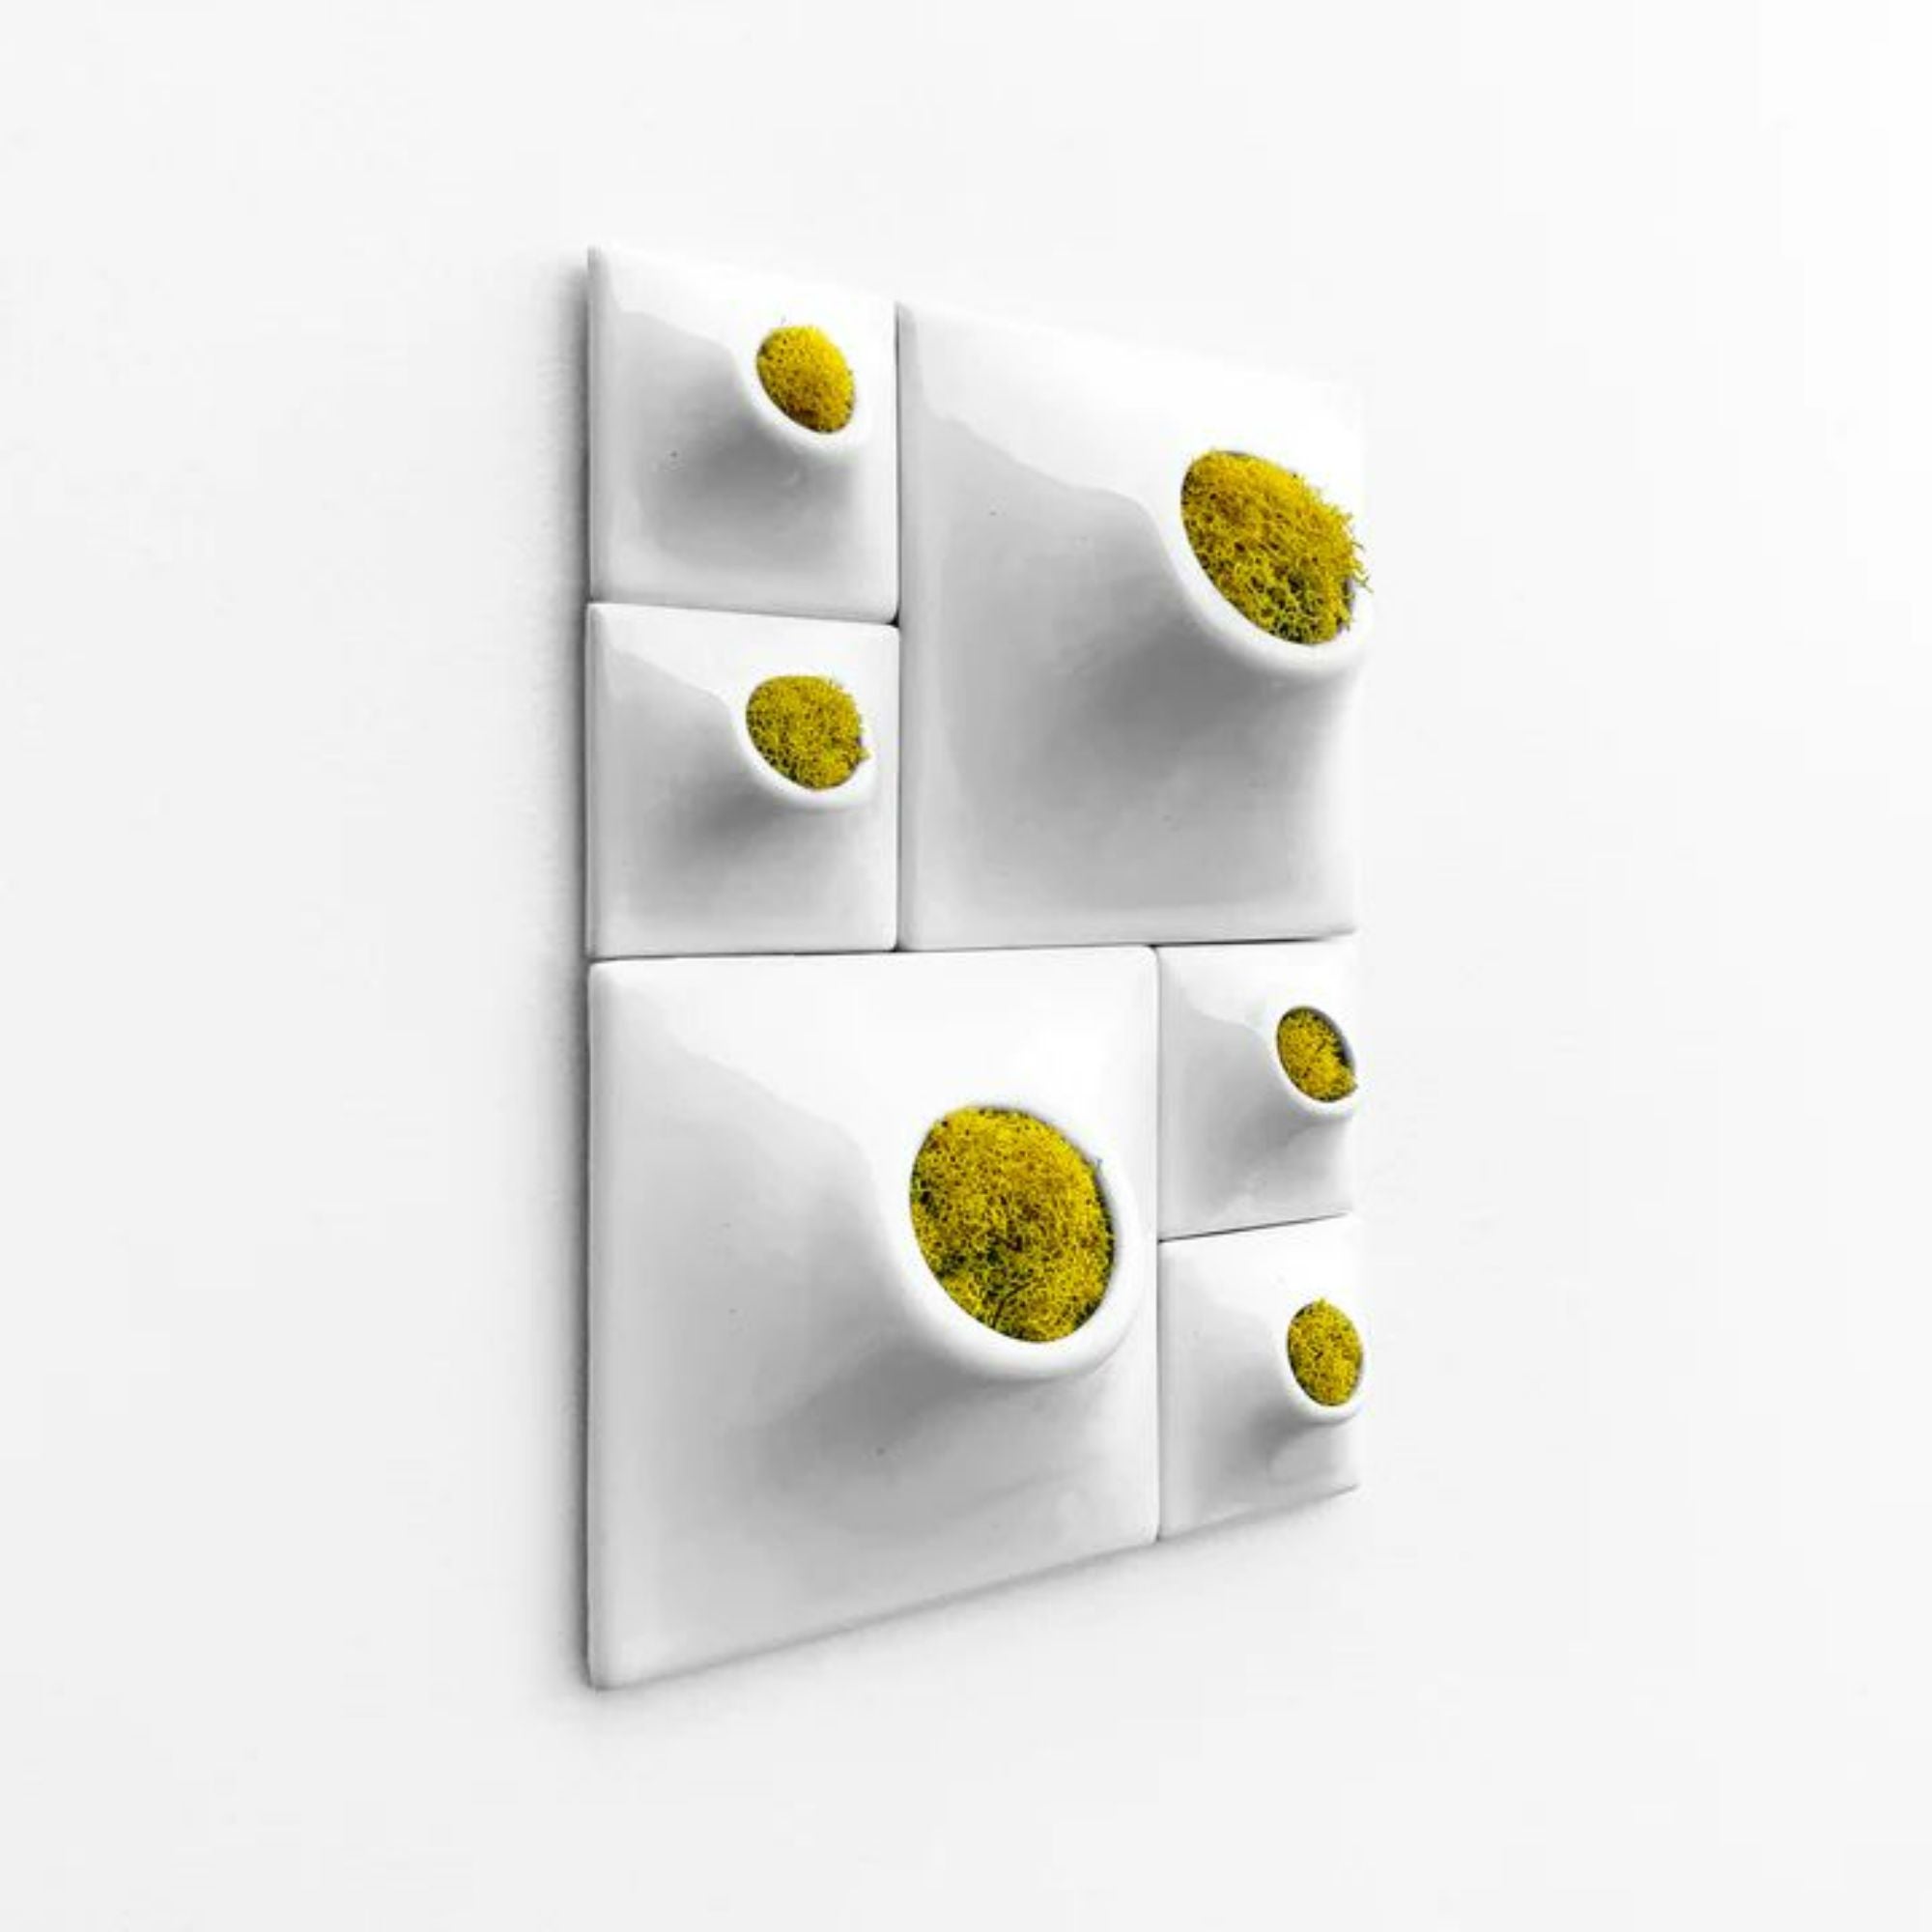 Modern White Wall Planter Set, Living Wall Sculpture, Moss Wall Art, Node BR2

Add a breathtaking modular plant wall or modern moss wall to any space with this eye catching Node Wall Planter set.  Elevate your home decor with living modern wall art